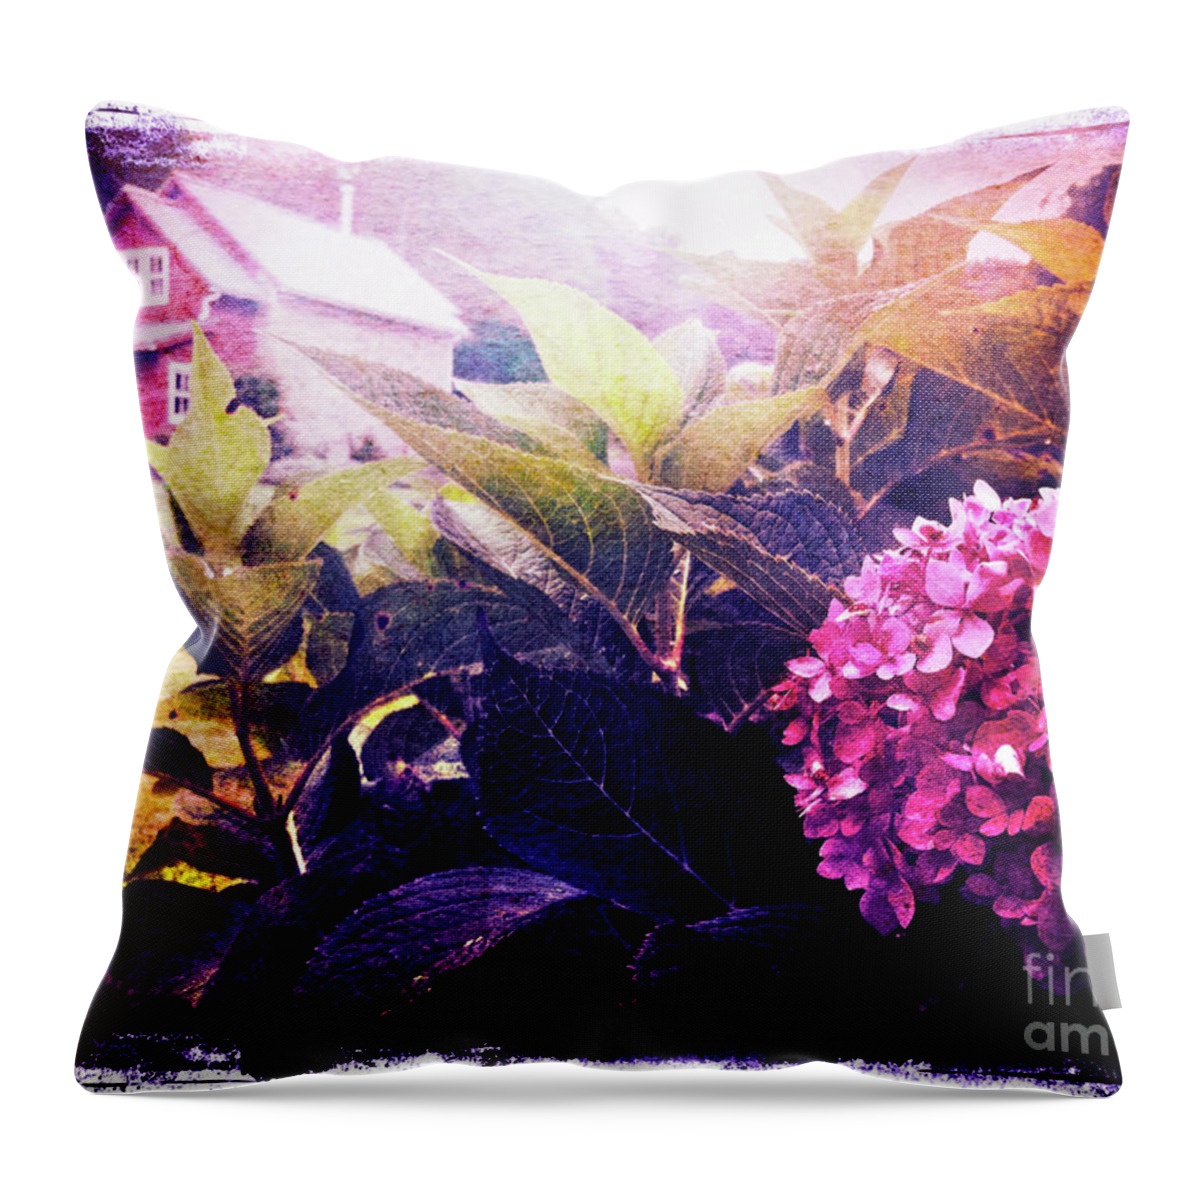 Garden Throw Pillow featuring the digital art Morning Glory by Kevyn Bashore